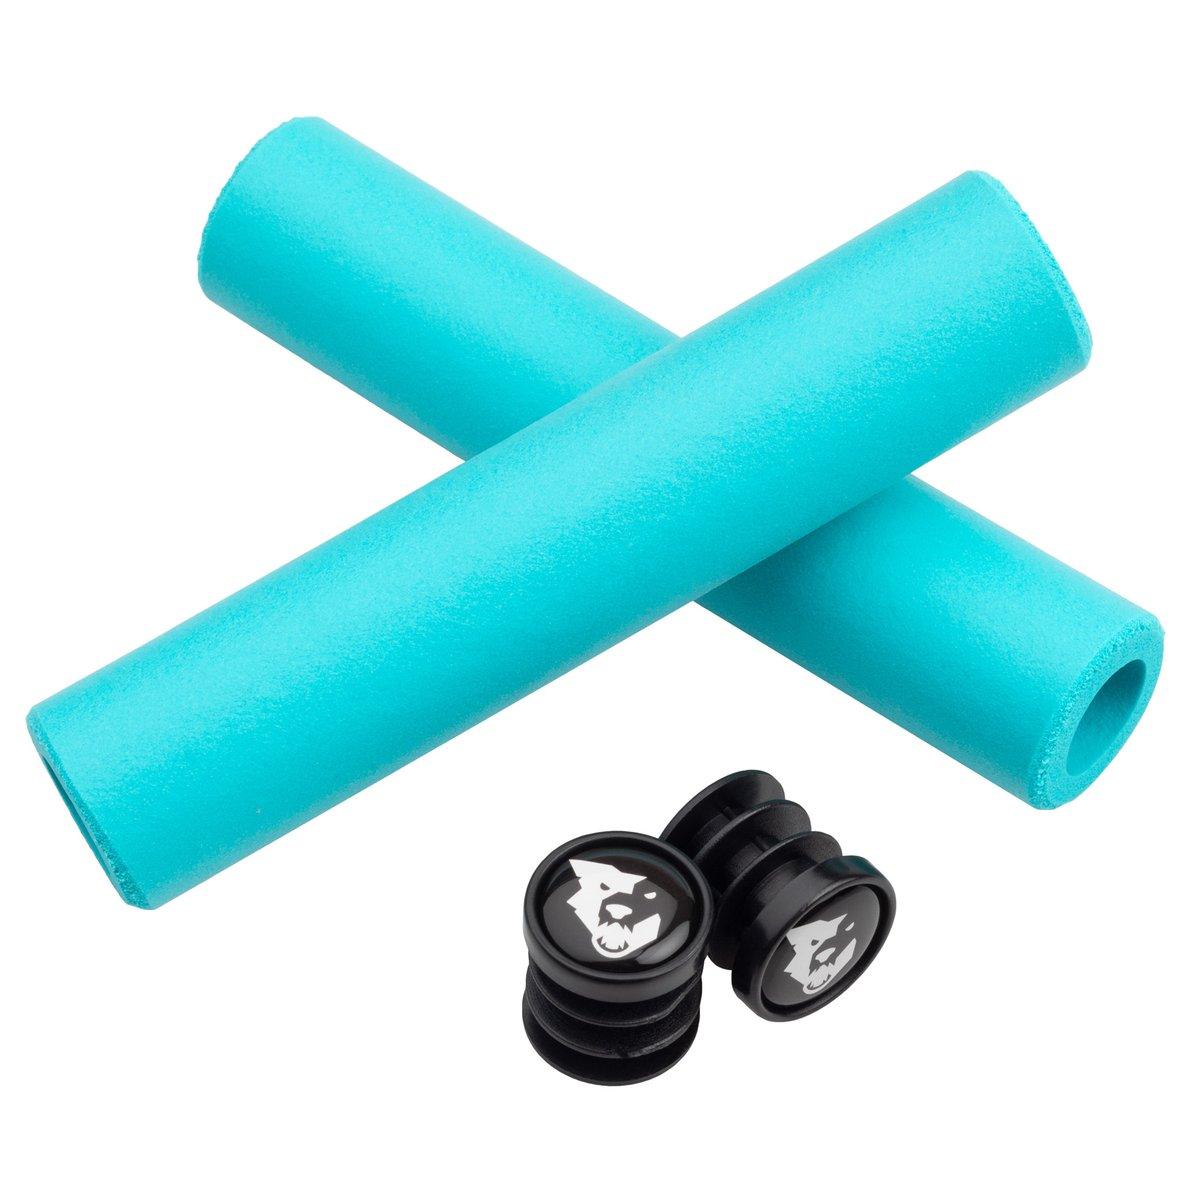 Wolf Tooth Components Wolf Tooth Components Razer Grips Teal